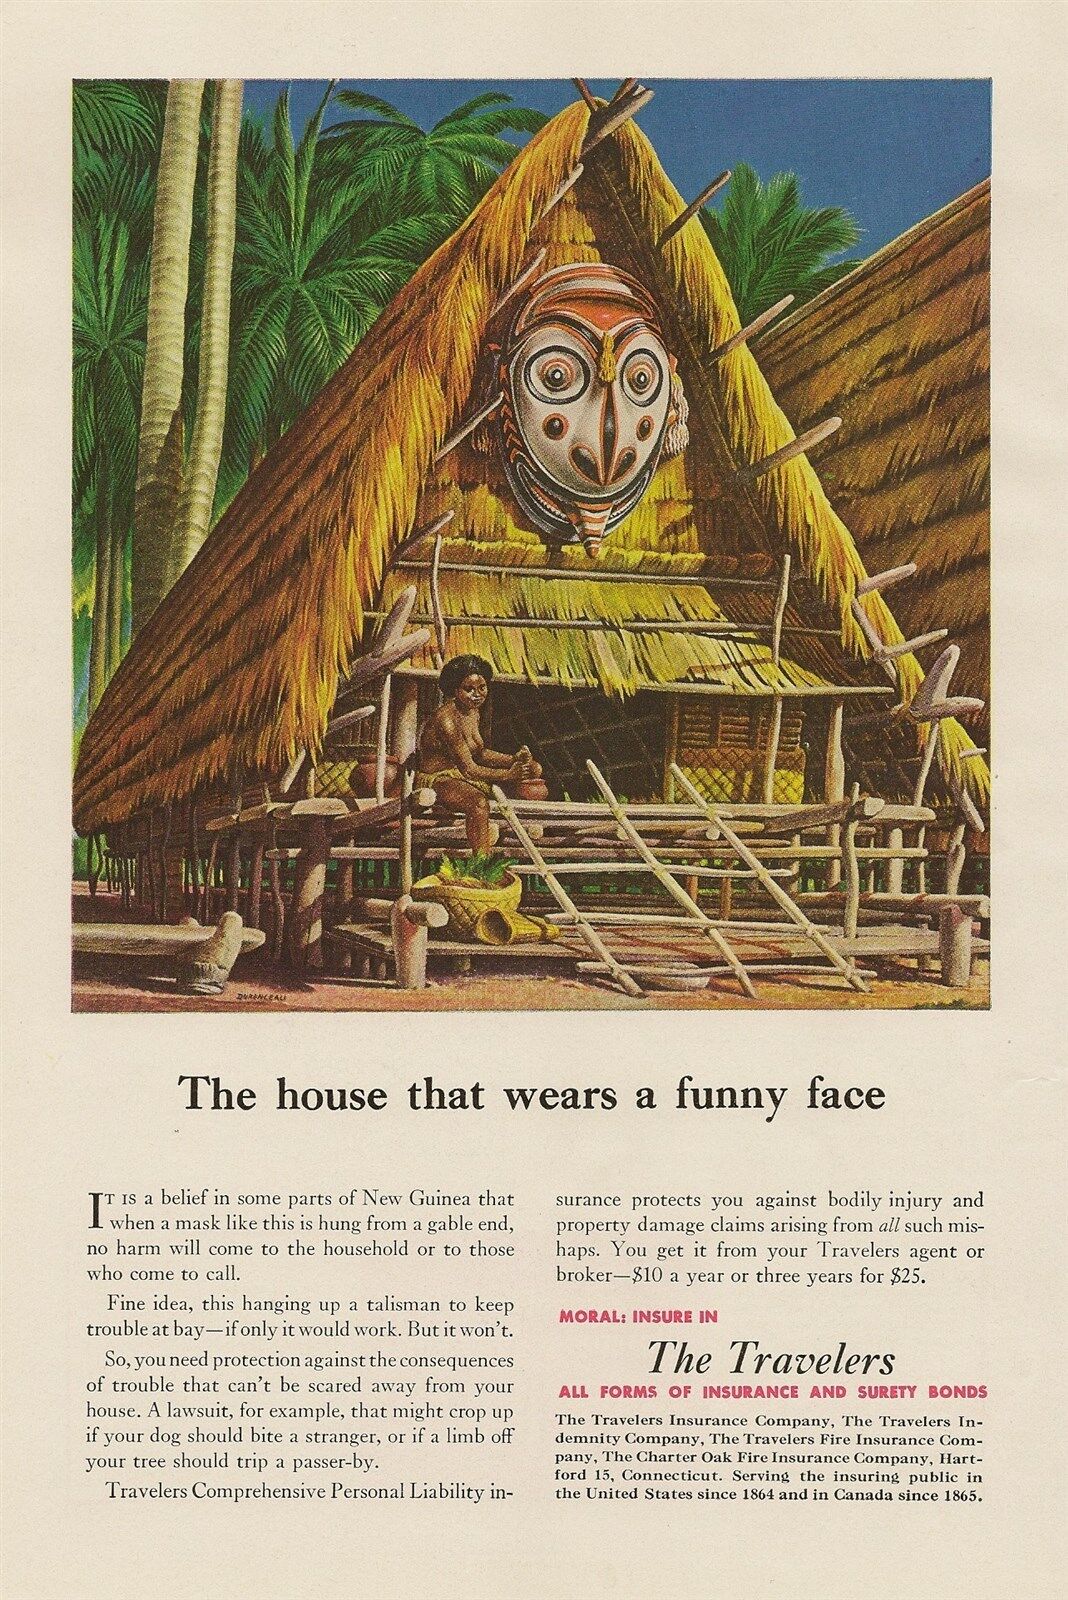 Full-Color 1951 Travelers Insurance Ad NEW GUINEA MASK Andre Duranceau Artwork